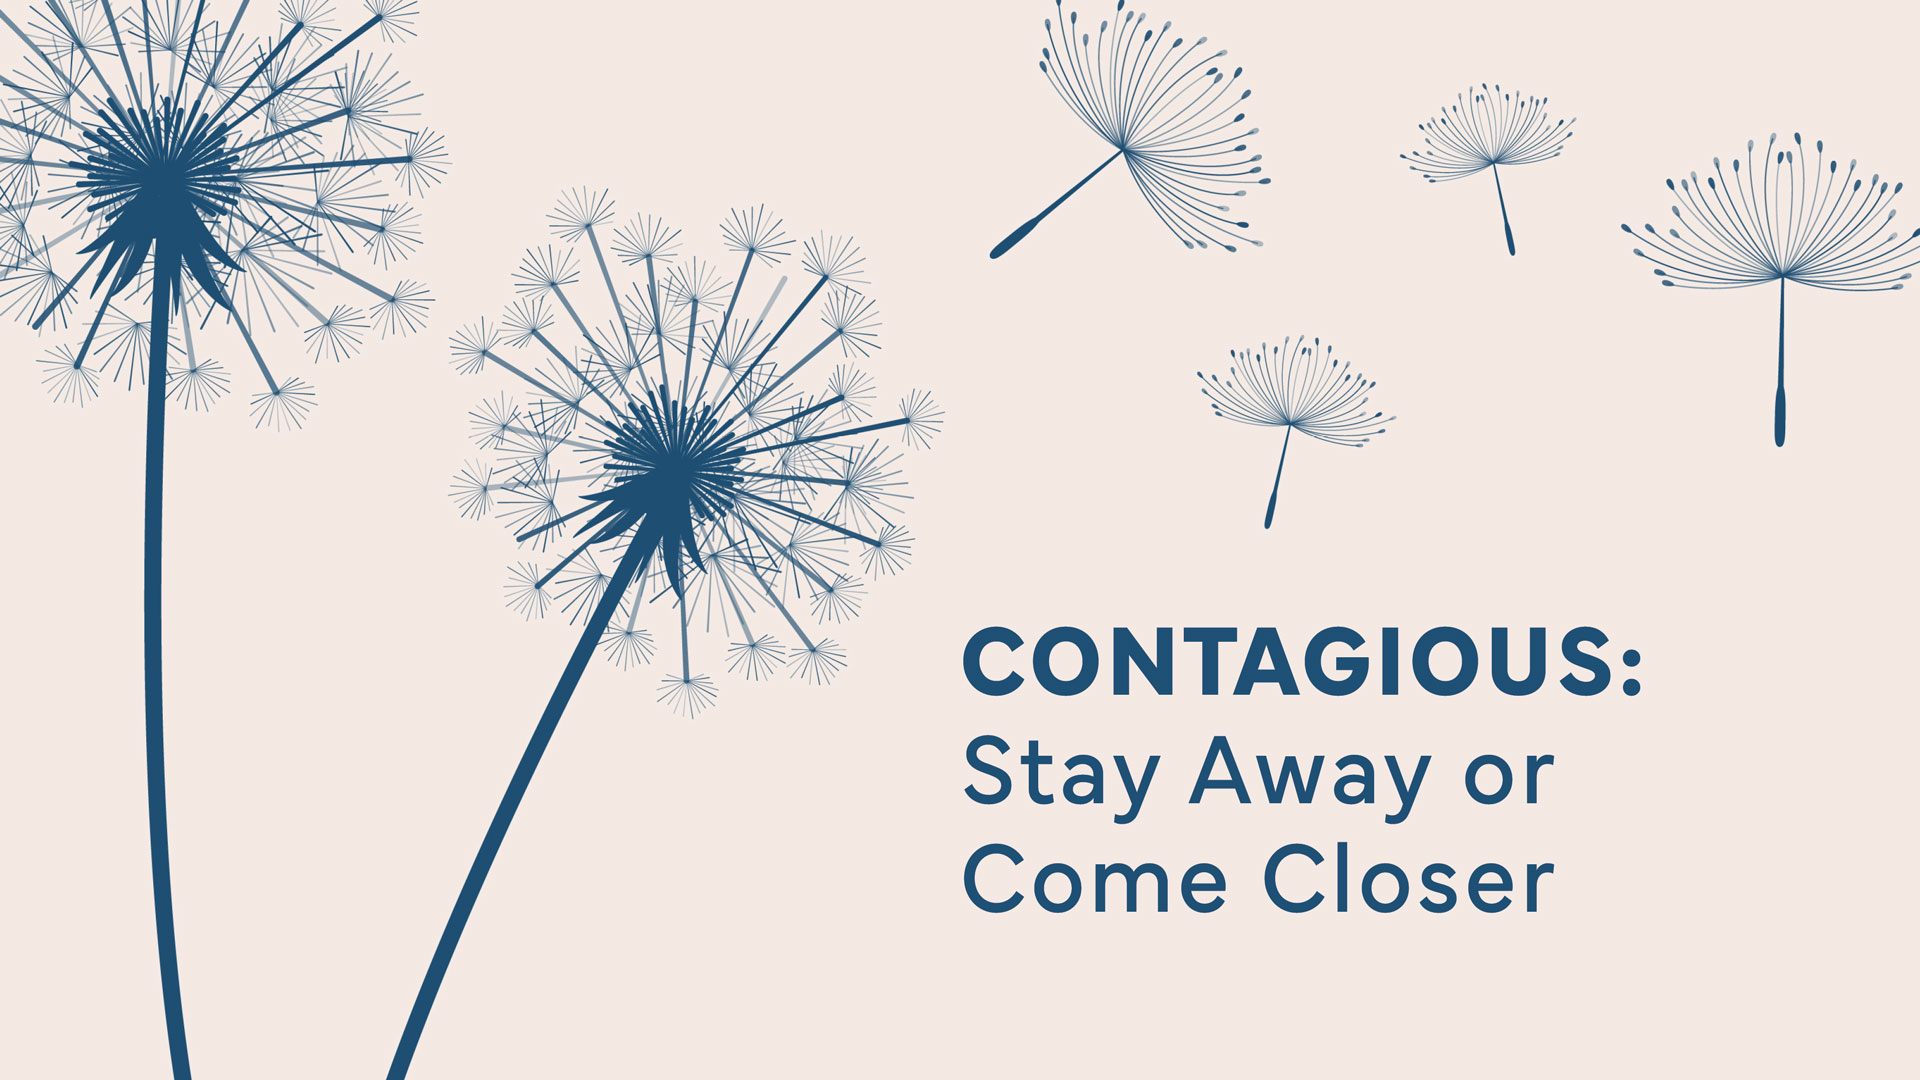 Contagious: Stay Away or Come Closer